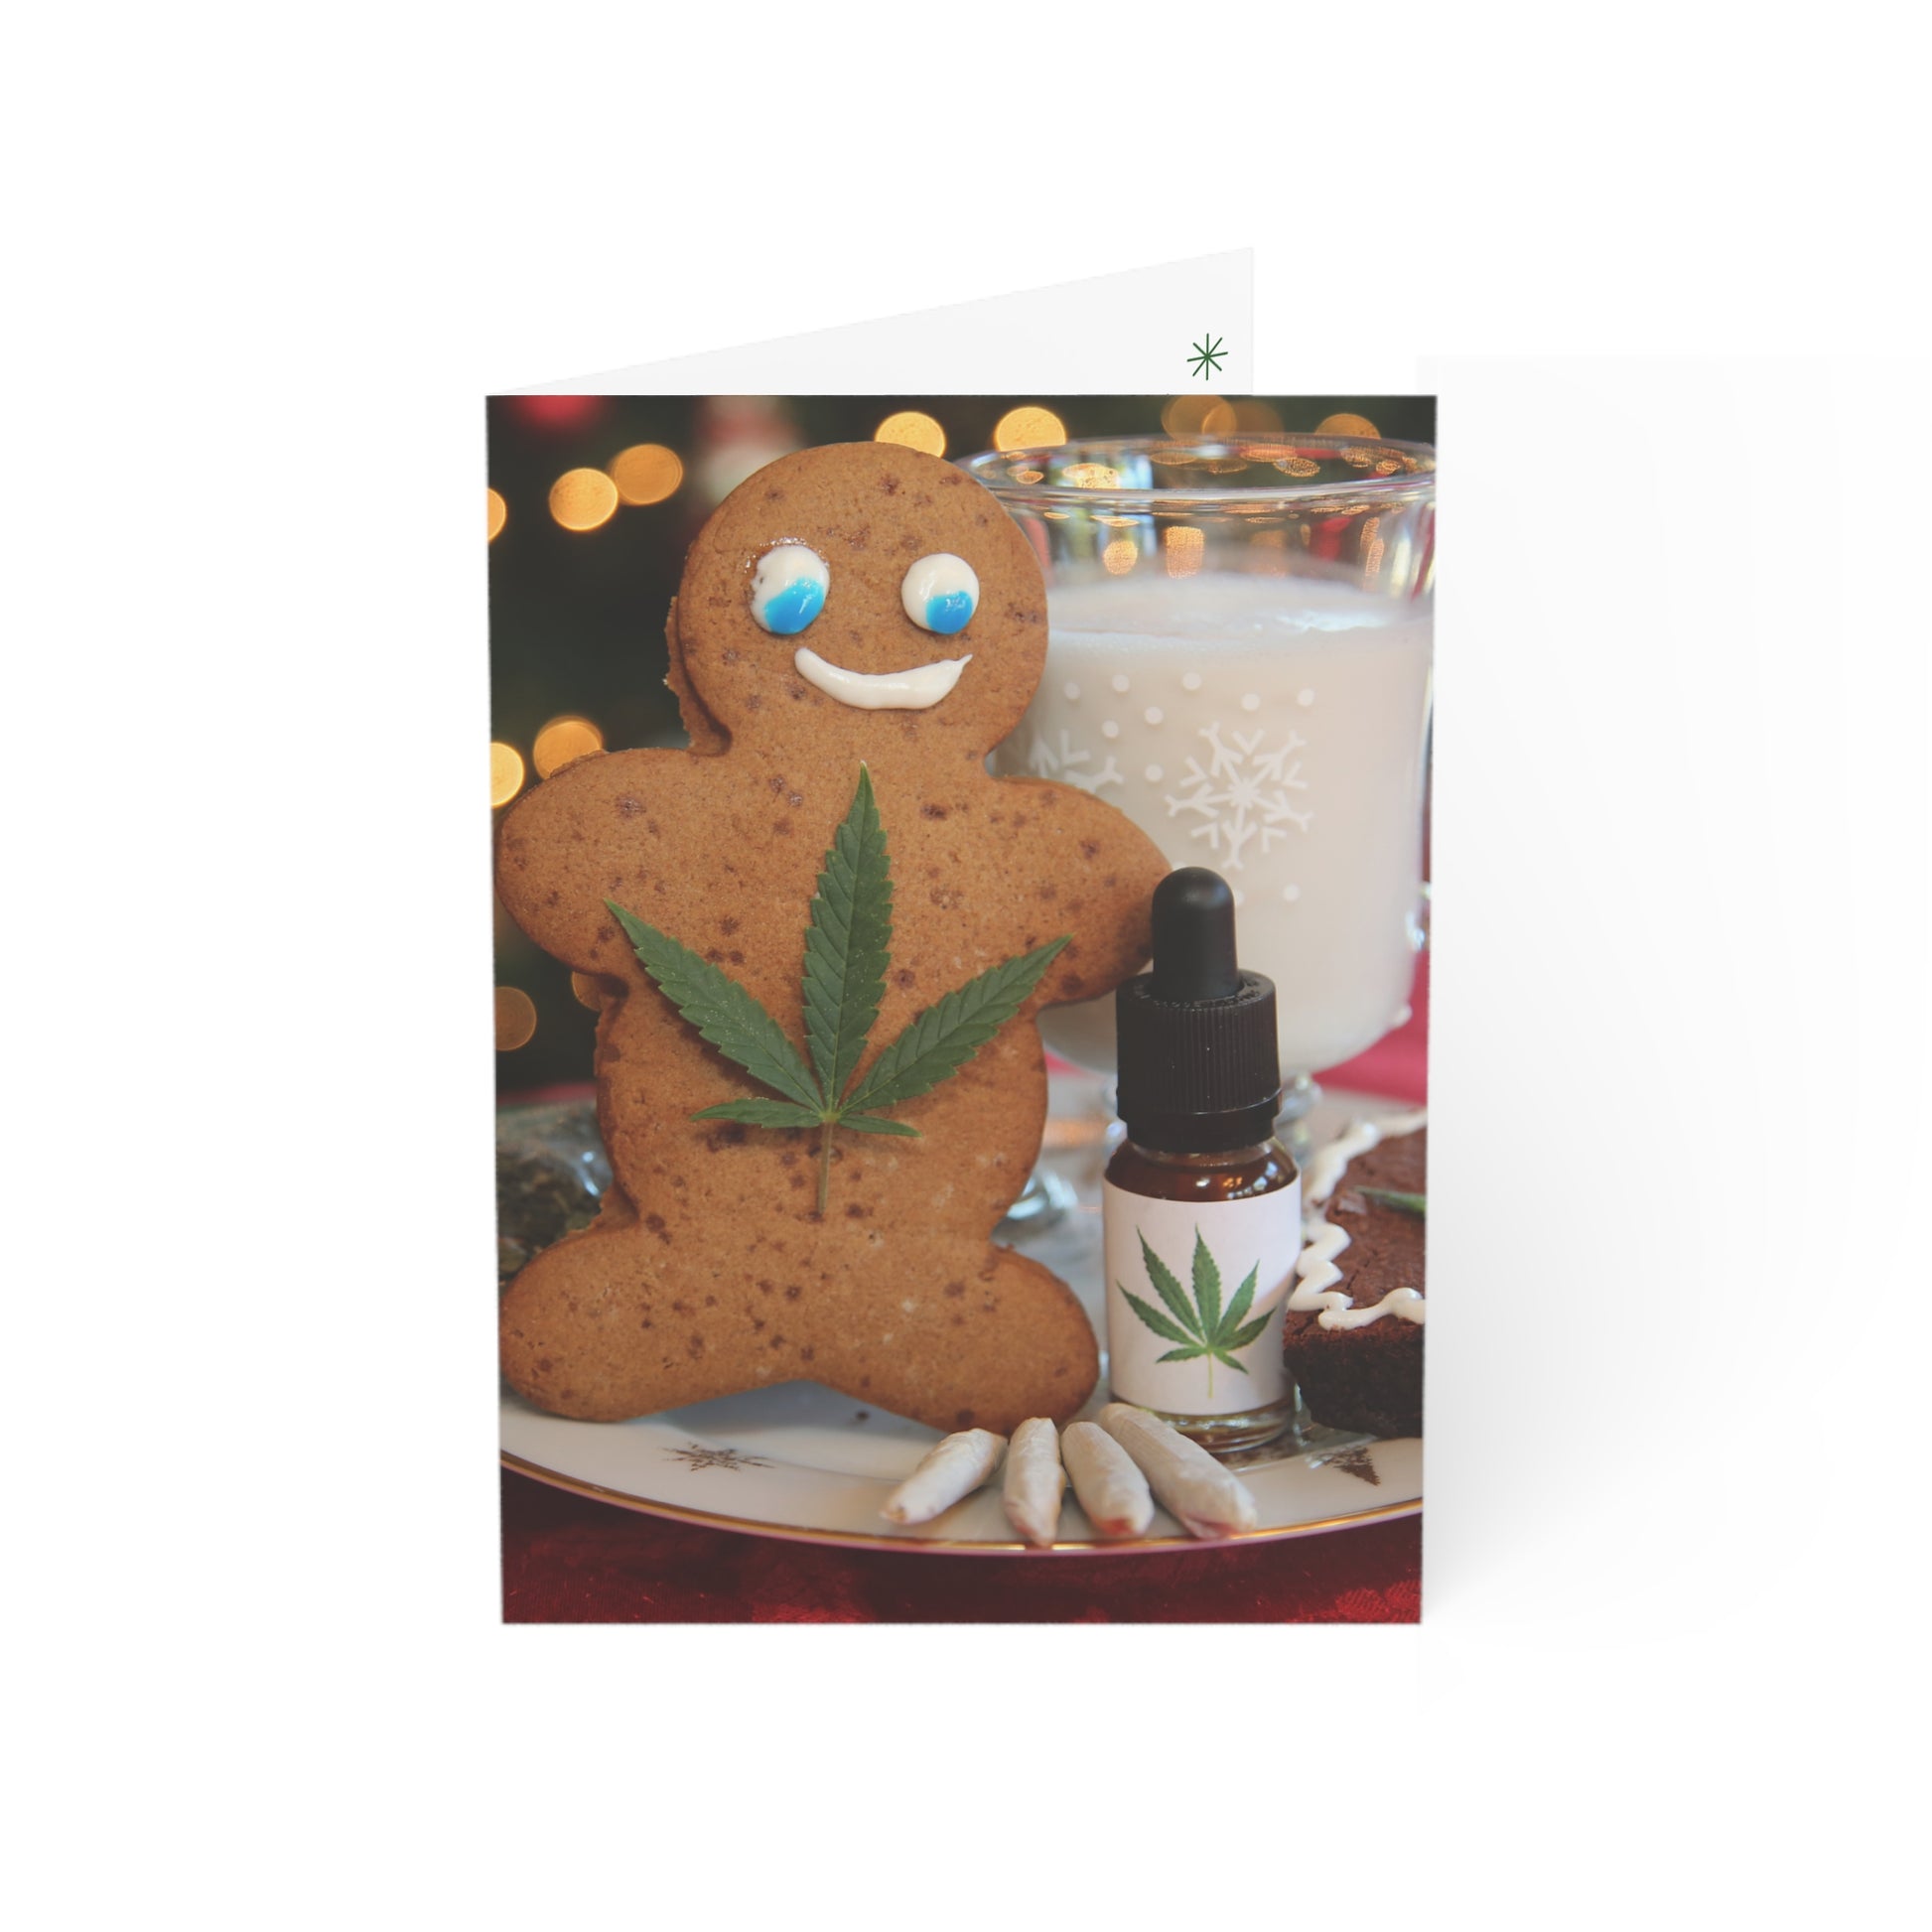 Gingerbread Man with a pot leaf next to a tincture, glass of milk, brownie, and joints for Santa.